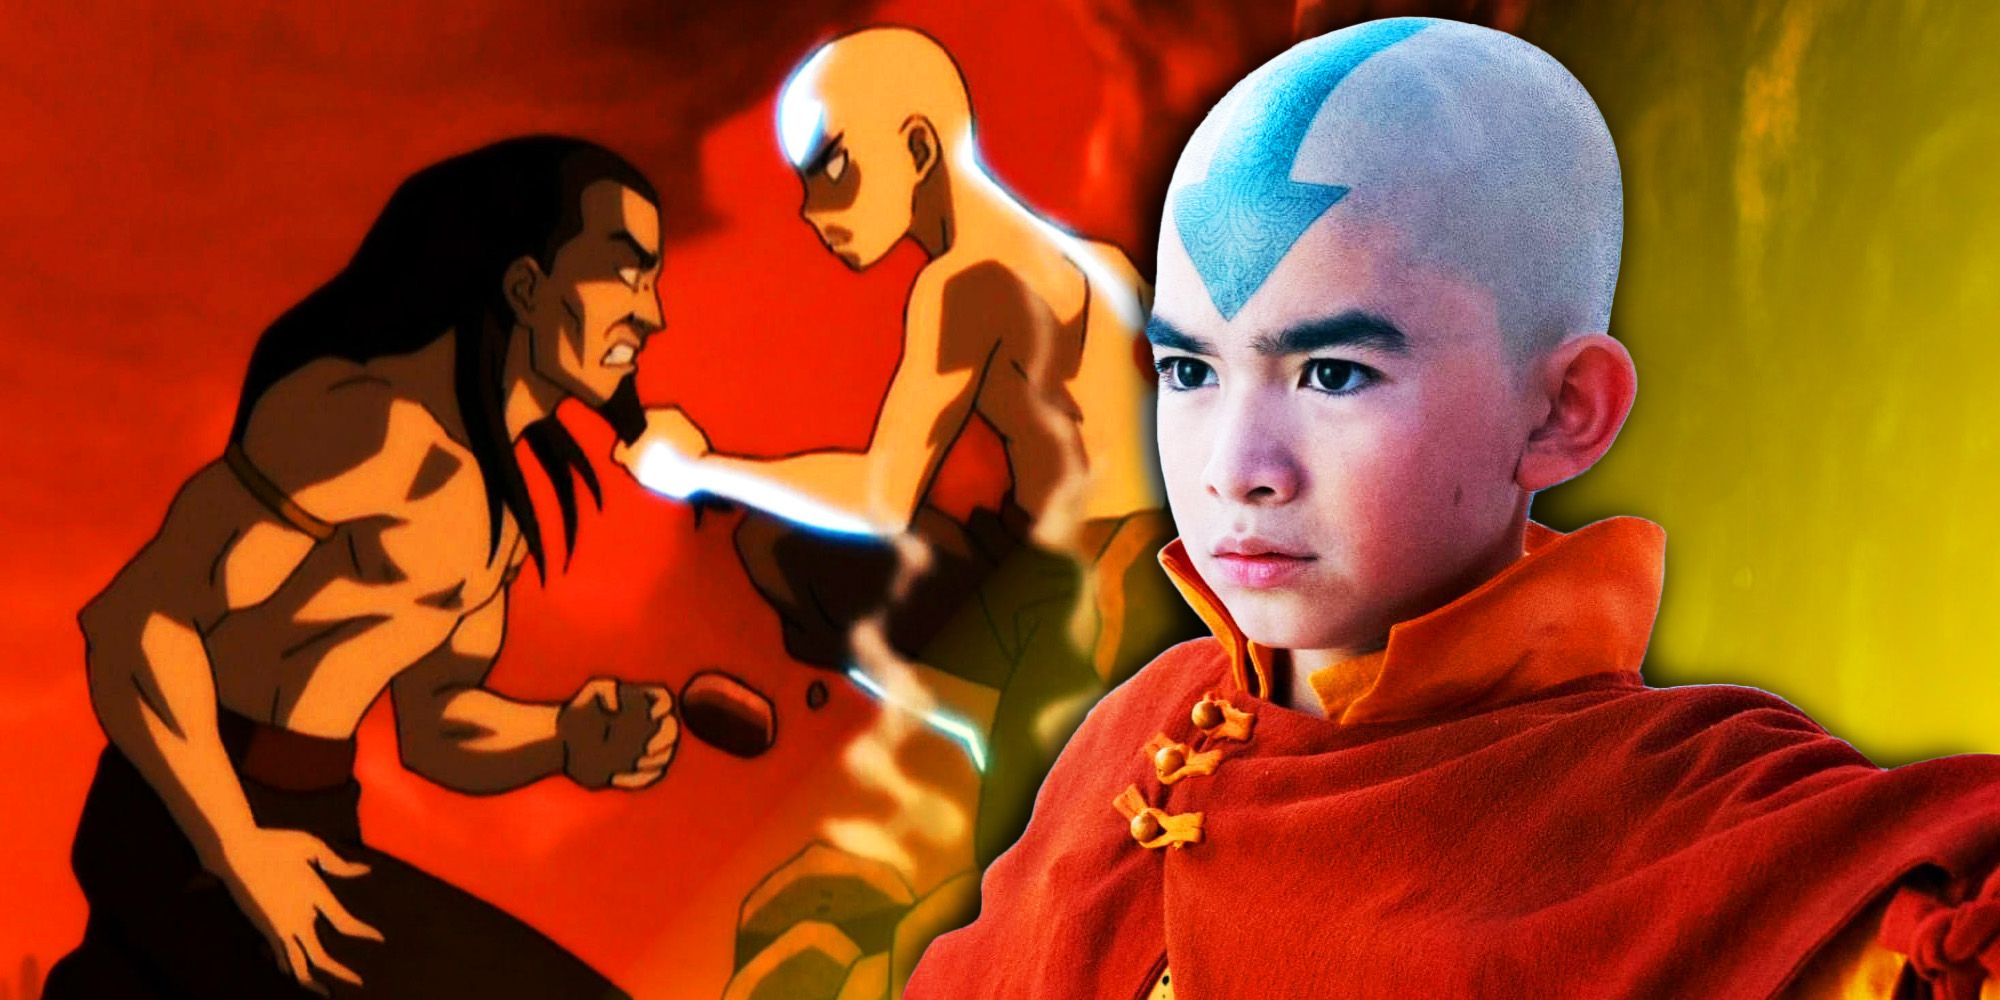 Animated Aang and Ozai fight in Avatar The Last Airbender's finale, with live-action Aang from Netflix's show on the right